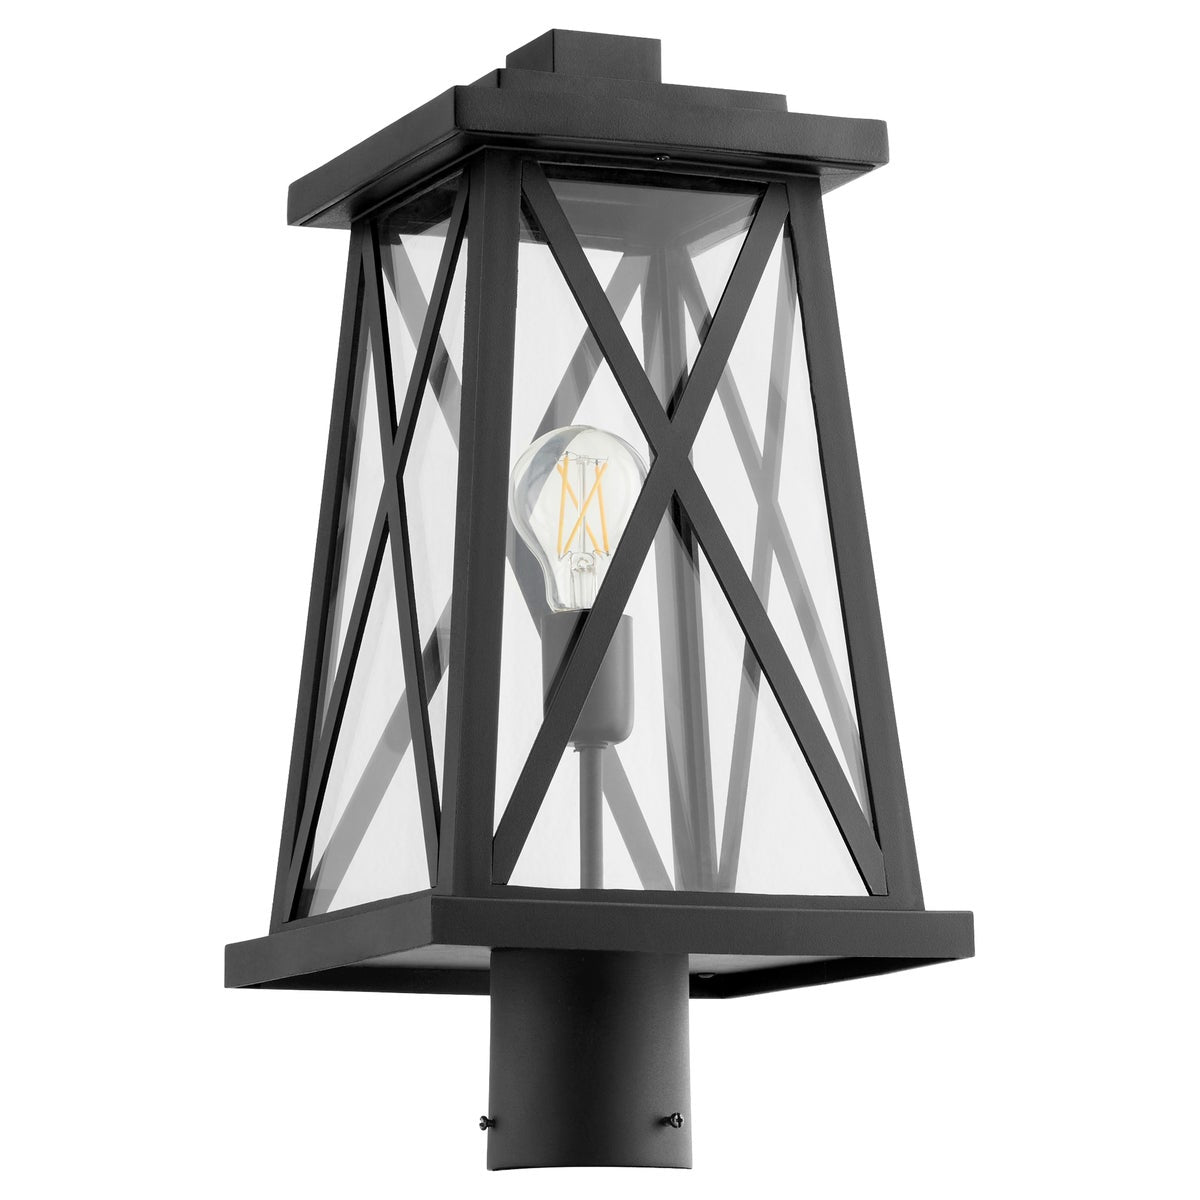 A black outdoor post light with a clear glass shade, featuring a classic X-brace design. The warm glow from the medium E26 bulb creates an elegant ambiance in any outdoor space. Perfect for both commercial and residential applications.